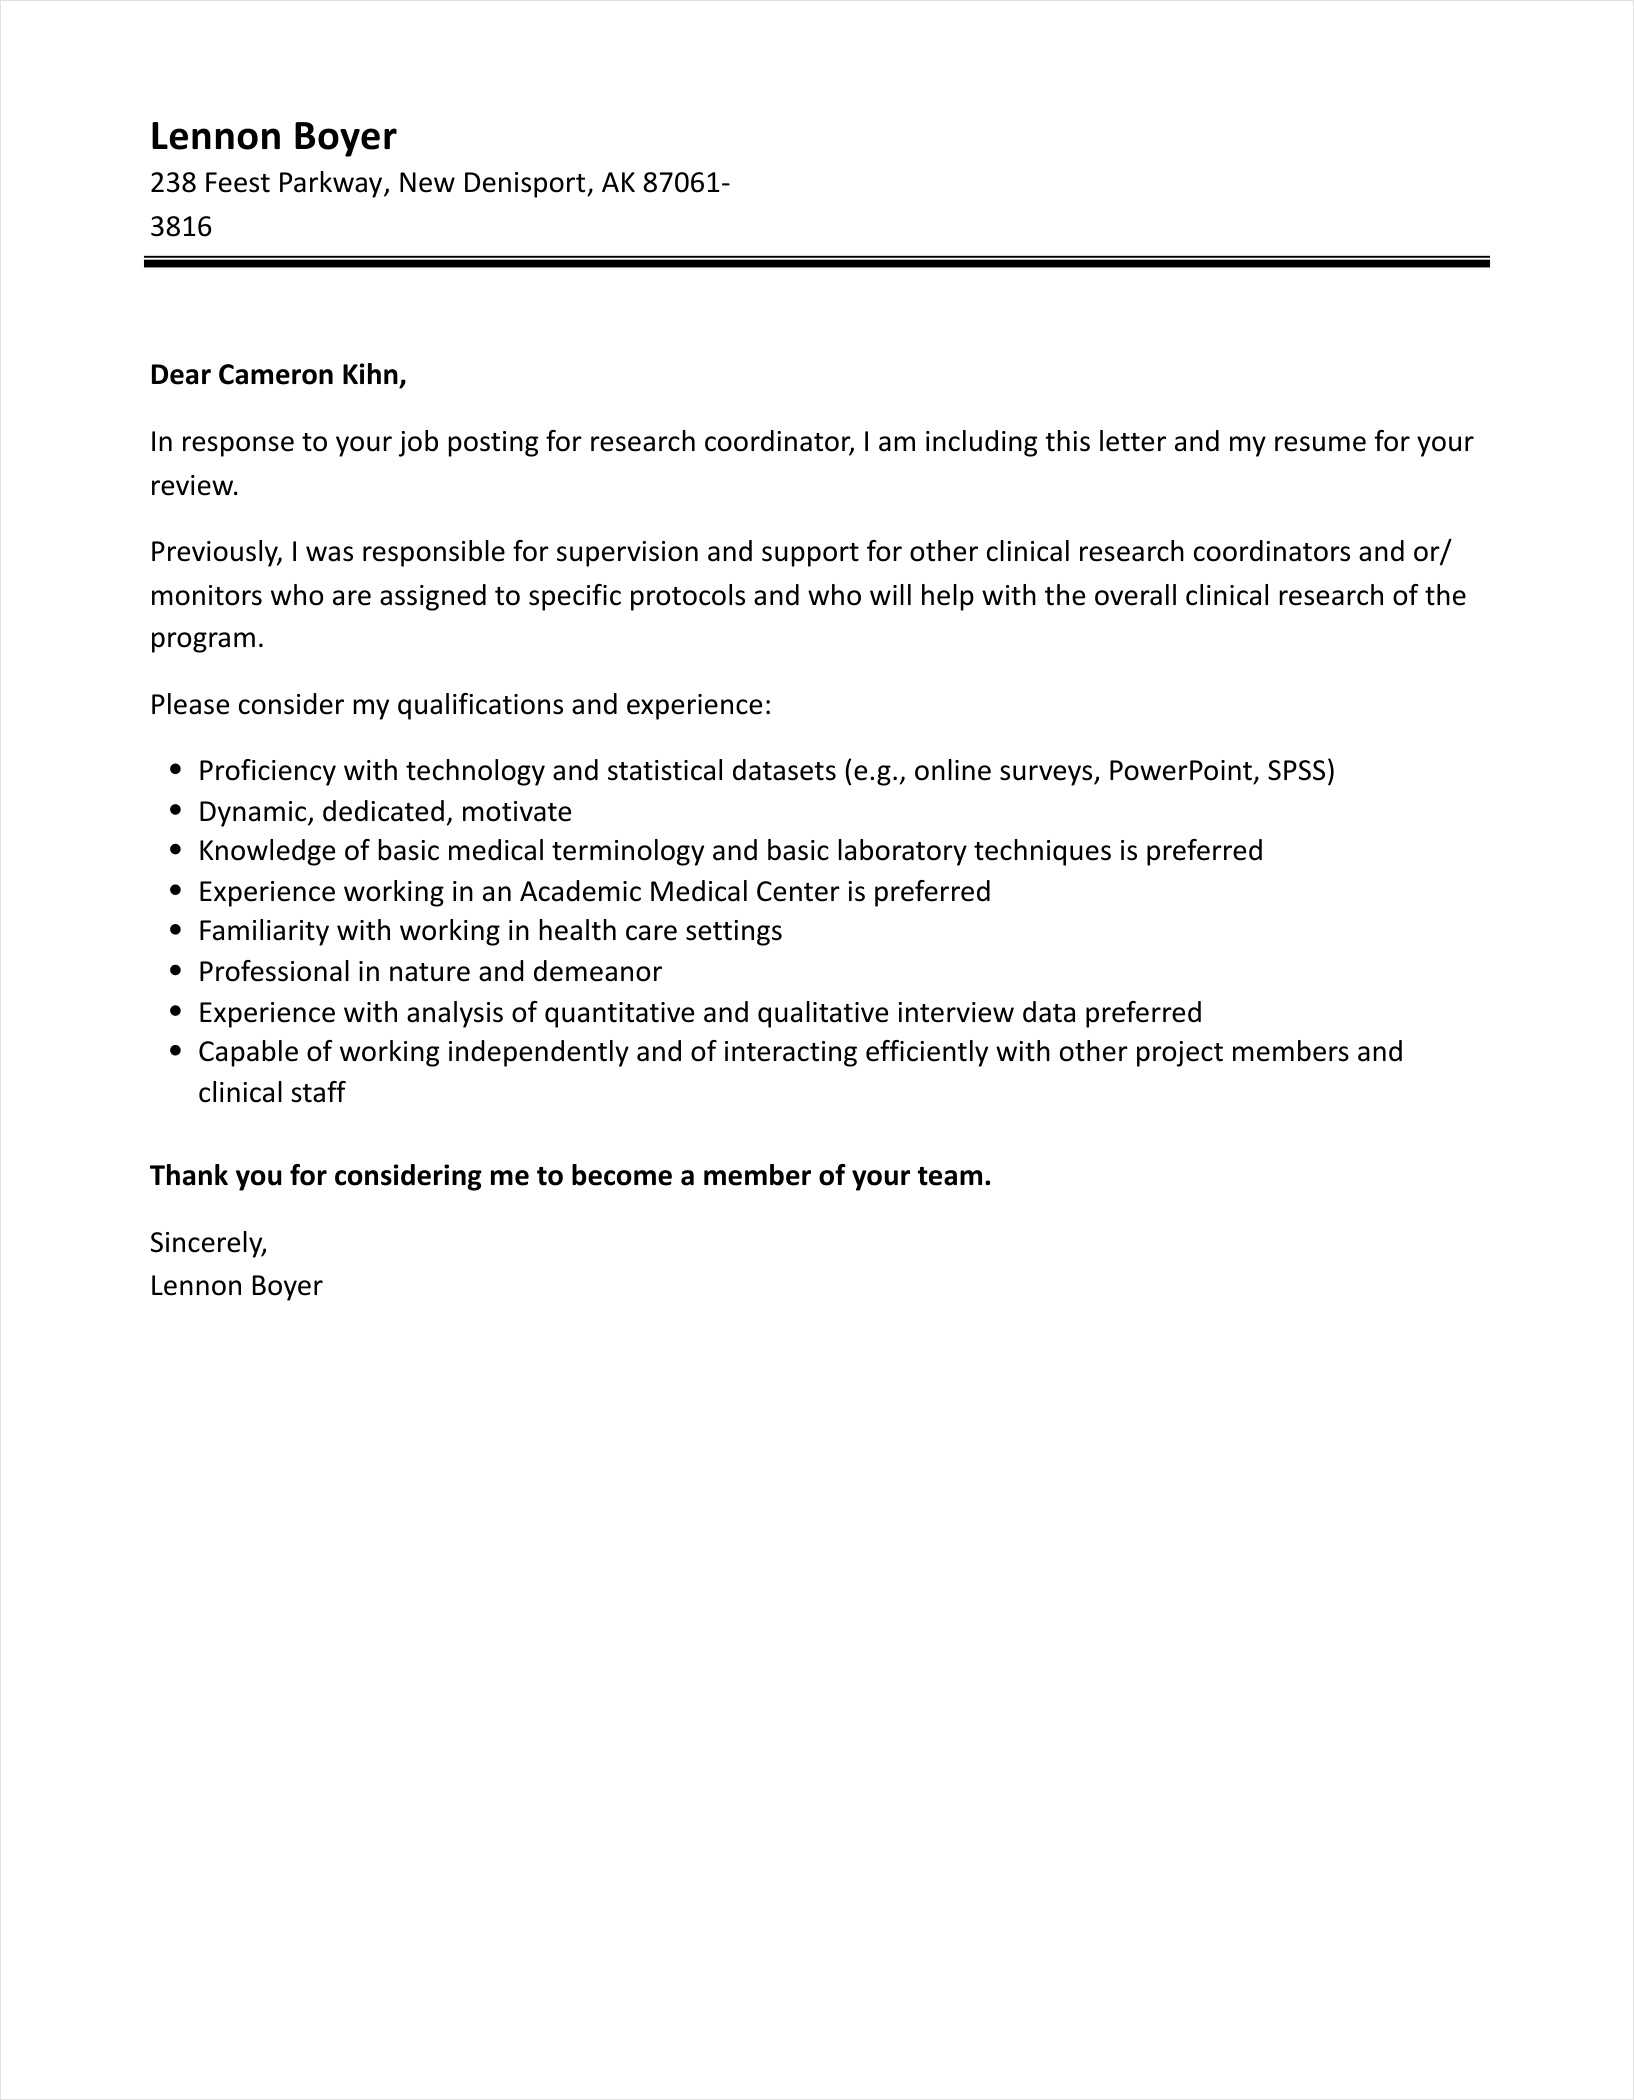 sample of research coordinator cover letter template